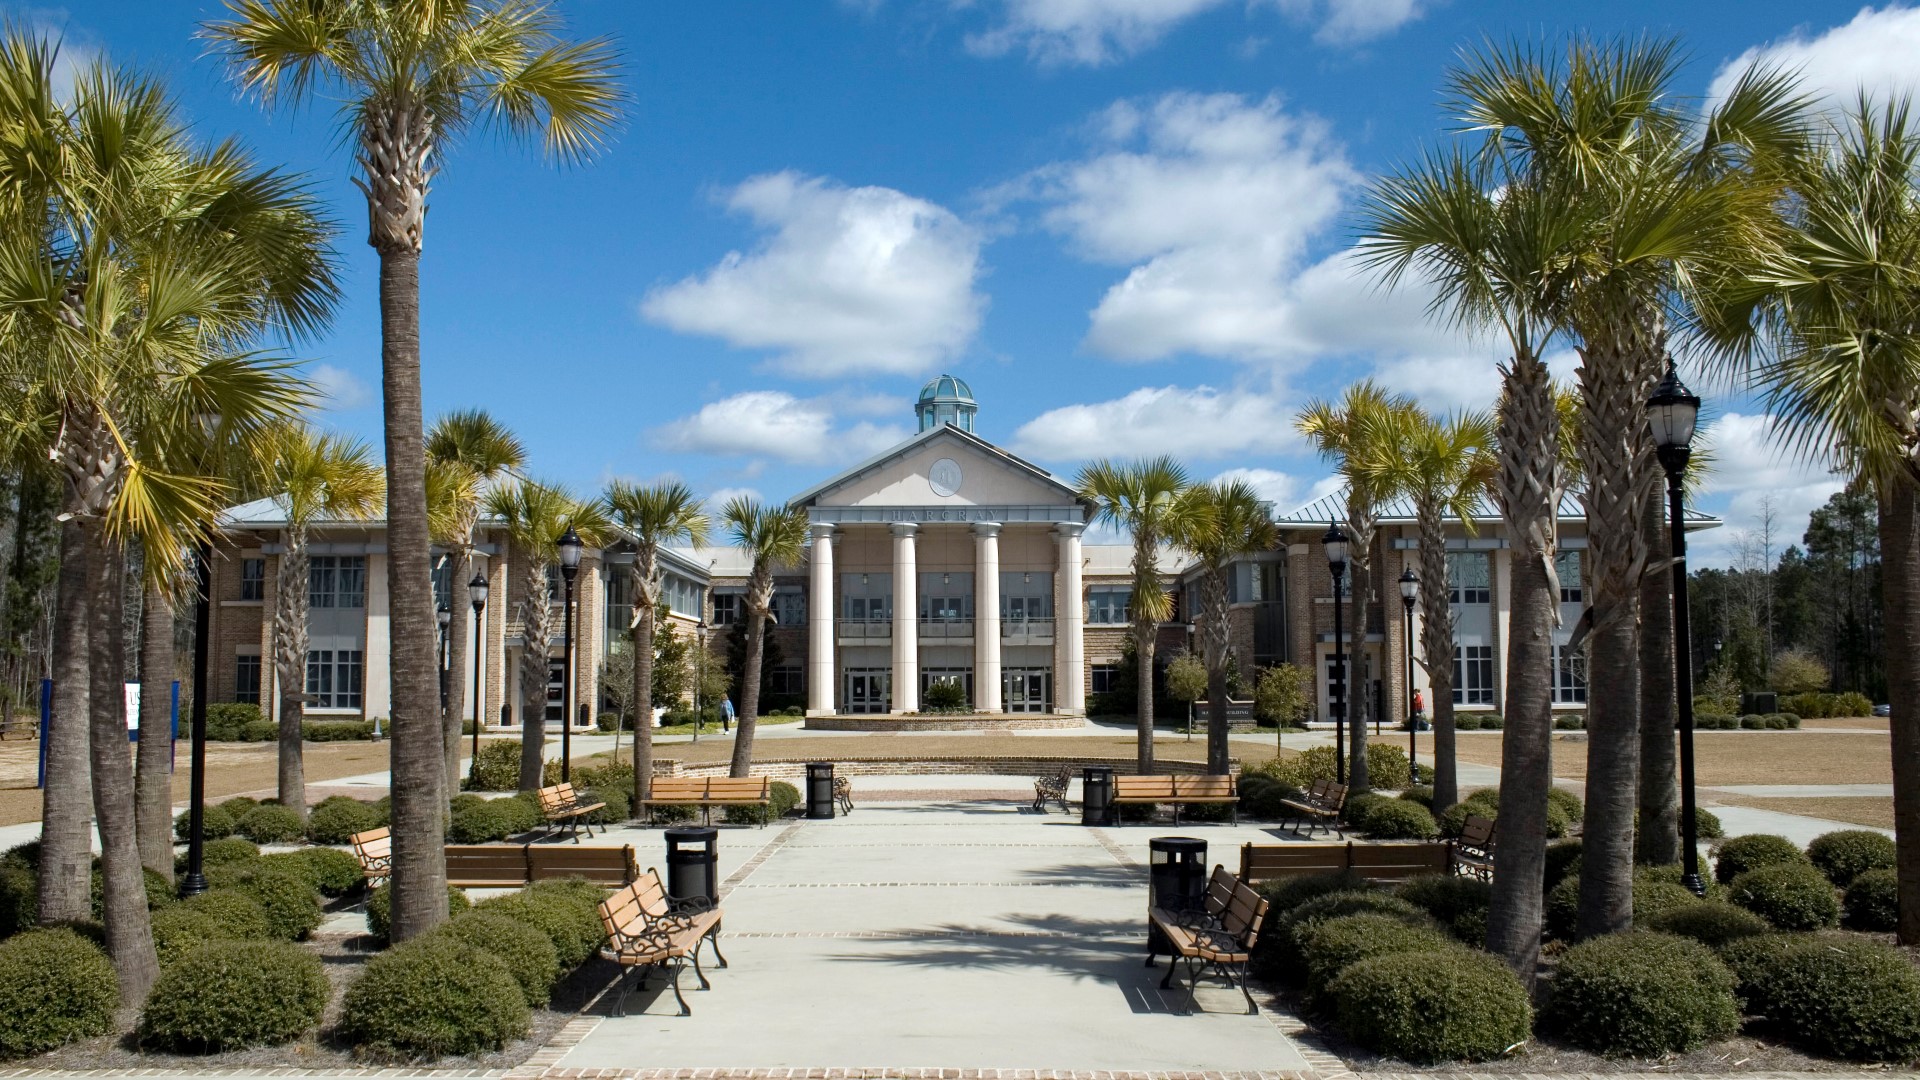 University of South Carolina Beaufort Master Plan by TSW, Atlanta - view of a plaza and buildings on campus